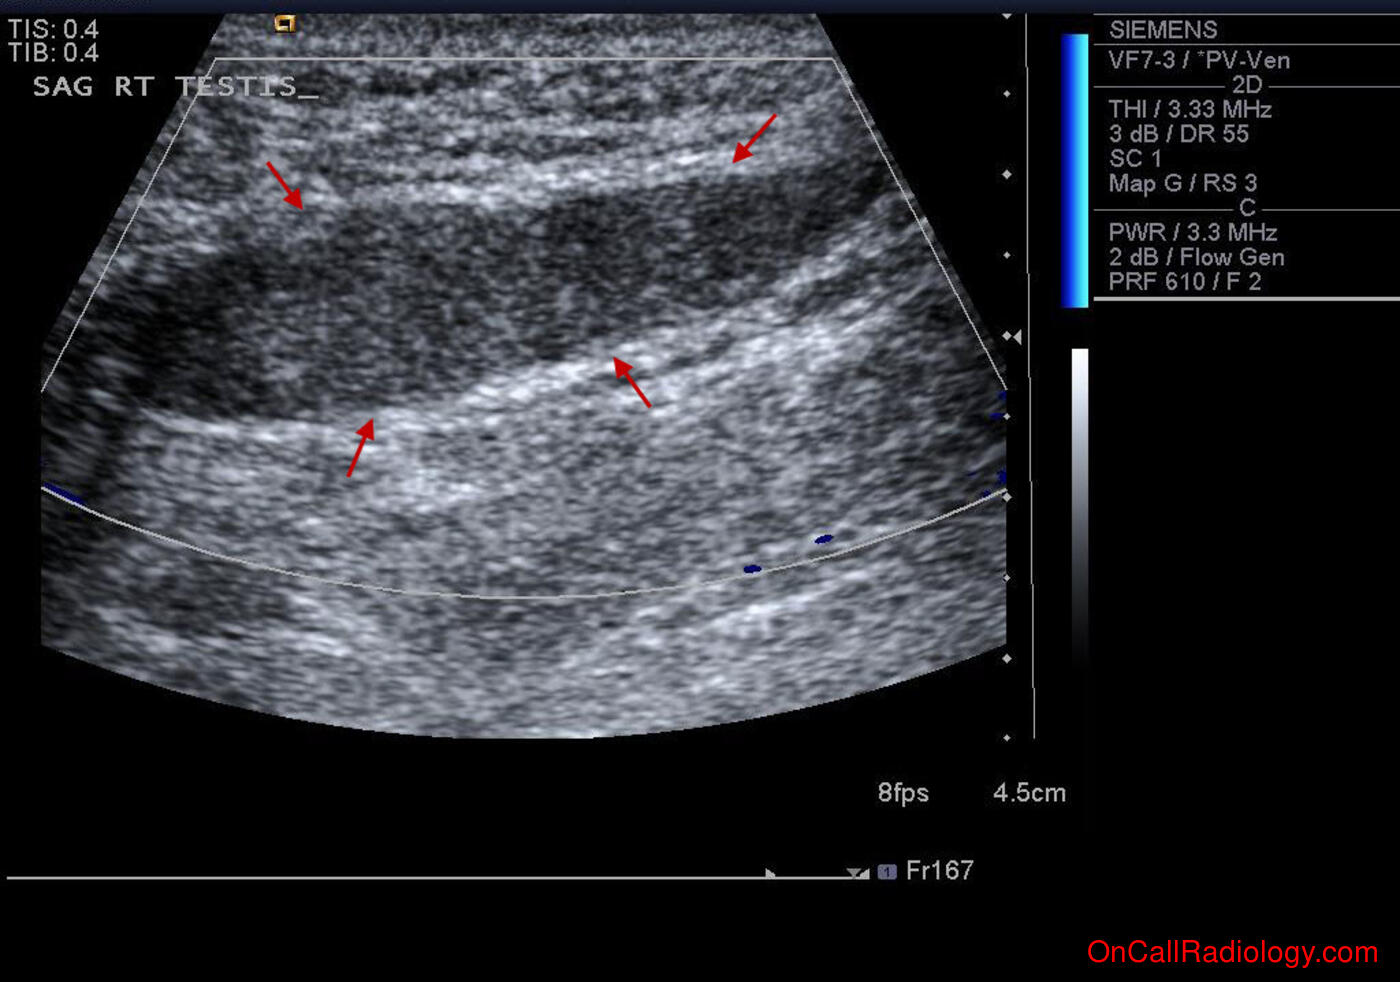 Male (Avascular testis in inguinal canal - Ultrasound)